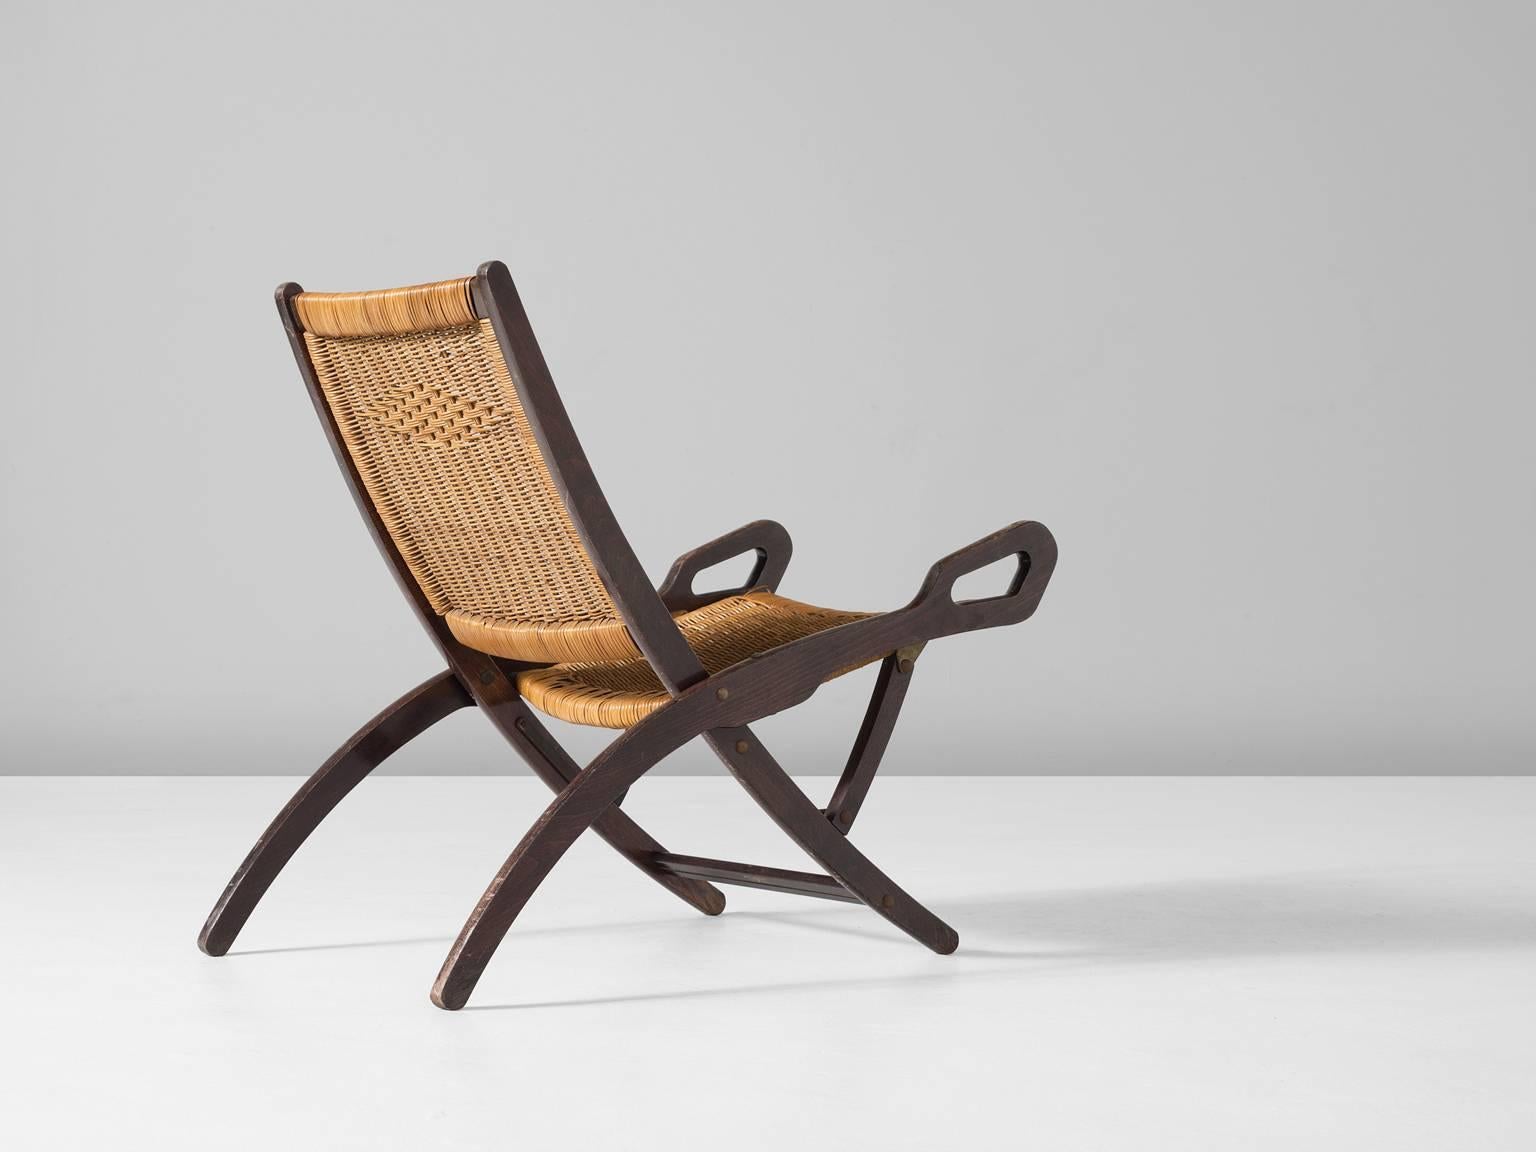 Mid-Century Modern Gio Ponti Rare 'Nifea' Folding Chair with Woven Cane Seating and Back